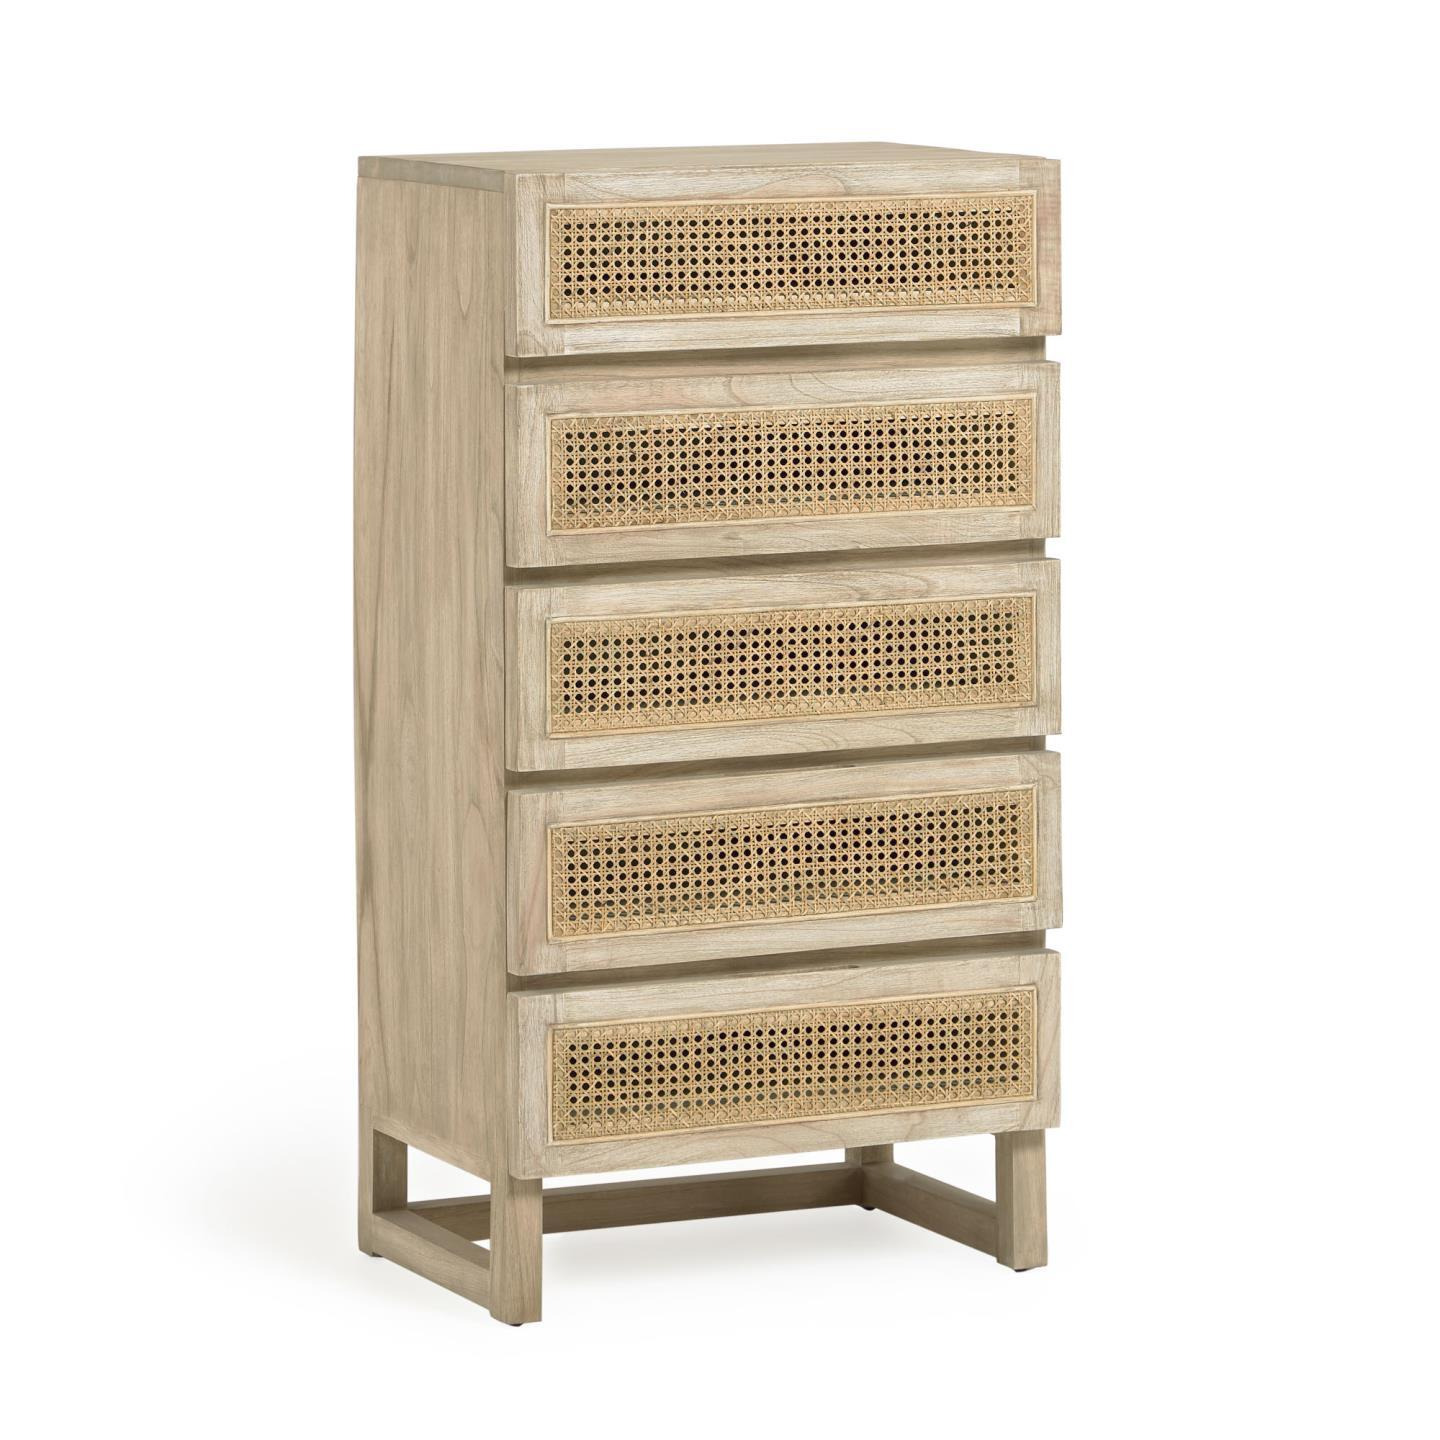 Rexit solid mindi wood and veneer chest of 5 drawers with rattan 60 x 113 cm